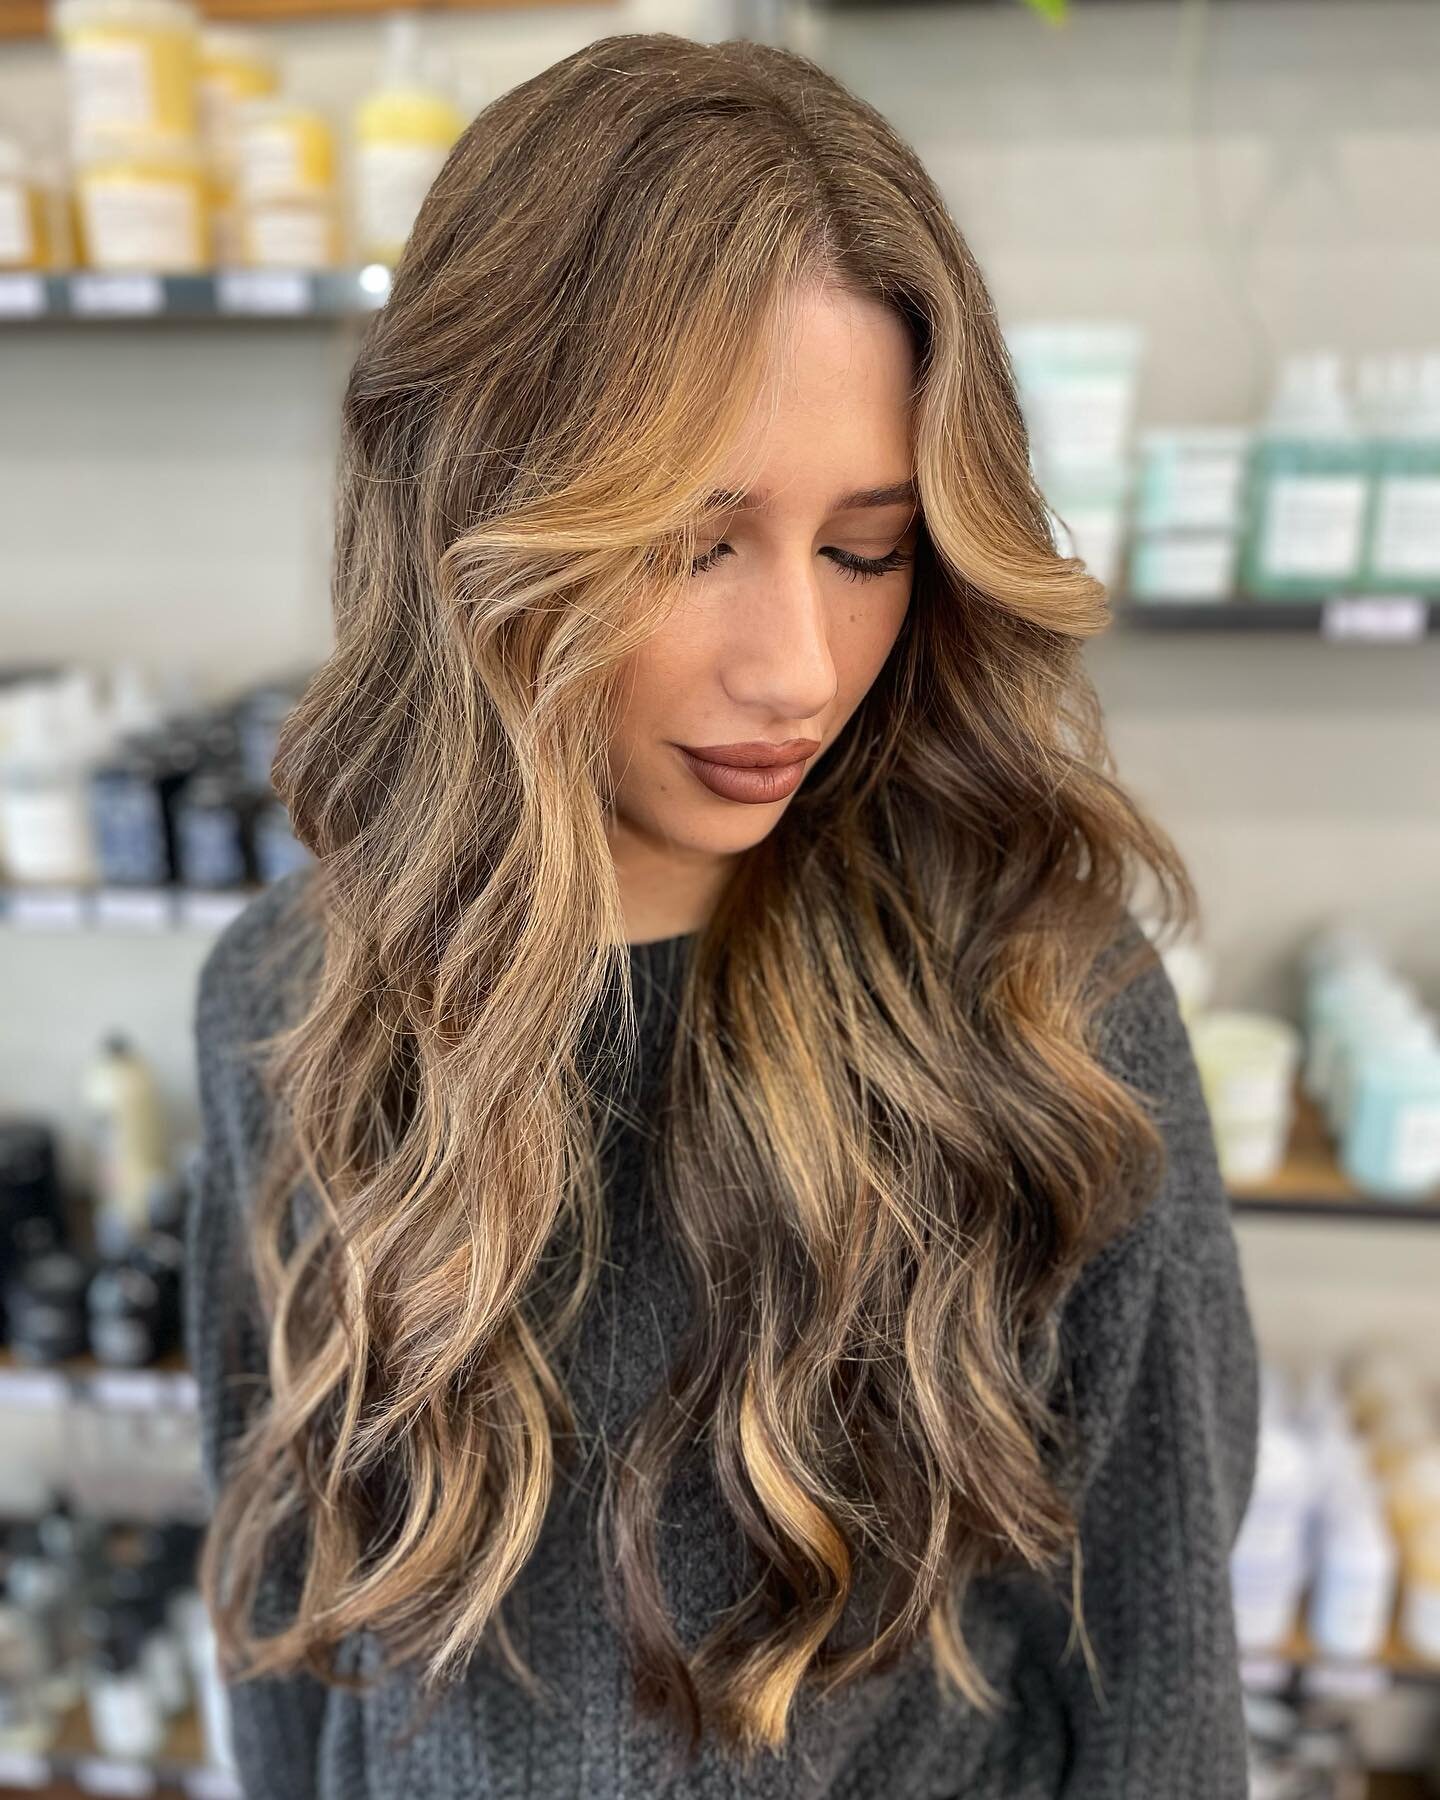 ✨ Warmth and Dimension ✨by @madelyn_mintsalonlodi #getminted 
▪️
▪️
#mintsalon #mintsalonlodi #lodi #hairtrends #2024trends #haircolor #livedincolor #warmbronde #colorcorrection #haircolor #lodistylist #lodilovers #hairhandcrafted